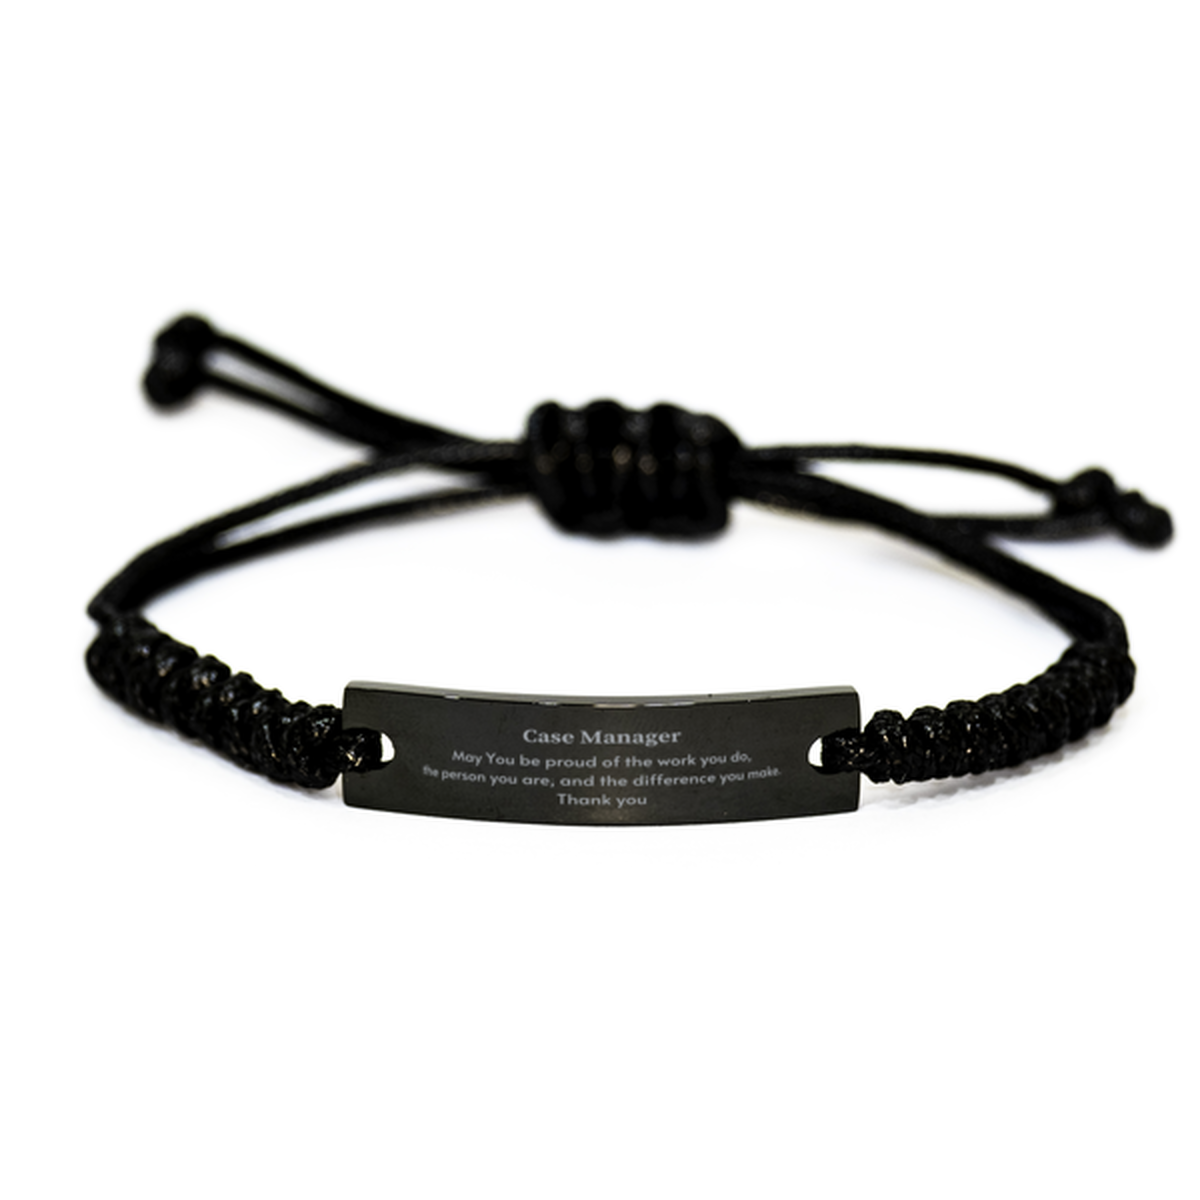 Heartwarming Black Rope Bracelet Retirement Coworkers Gifts for Case Manager, Case Manager May You be proud of the work you do, the person you are Gifts for Boss Men Women Friends